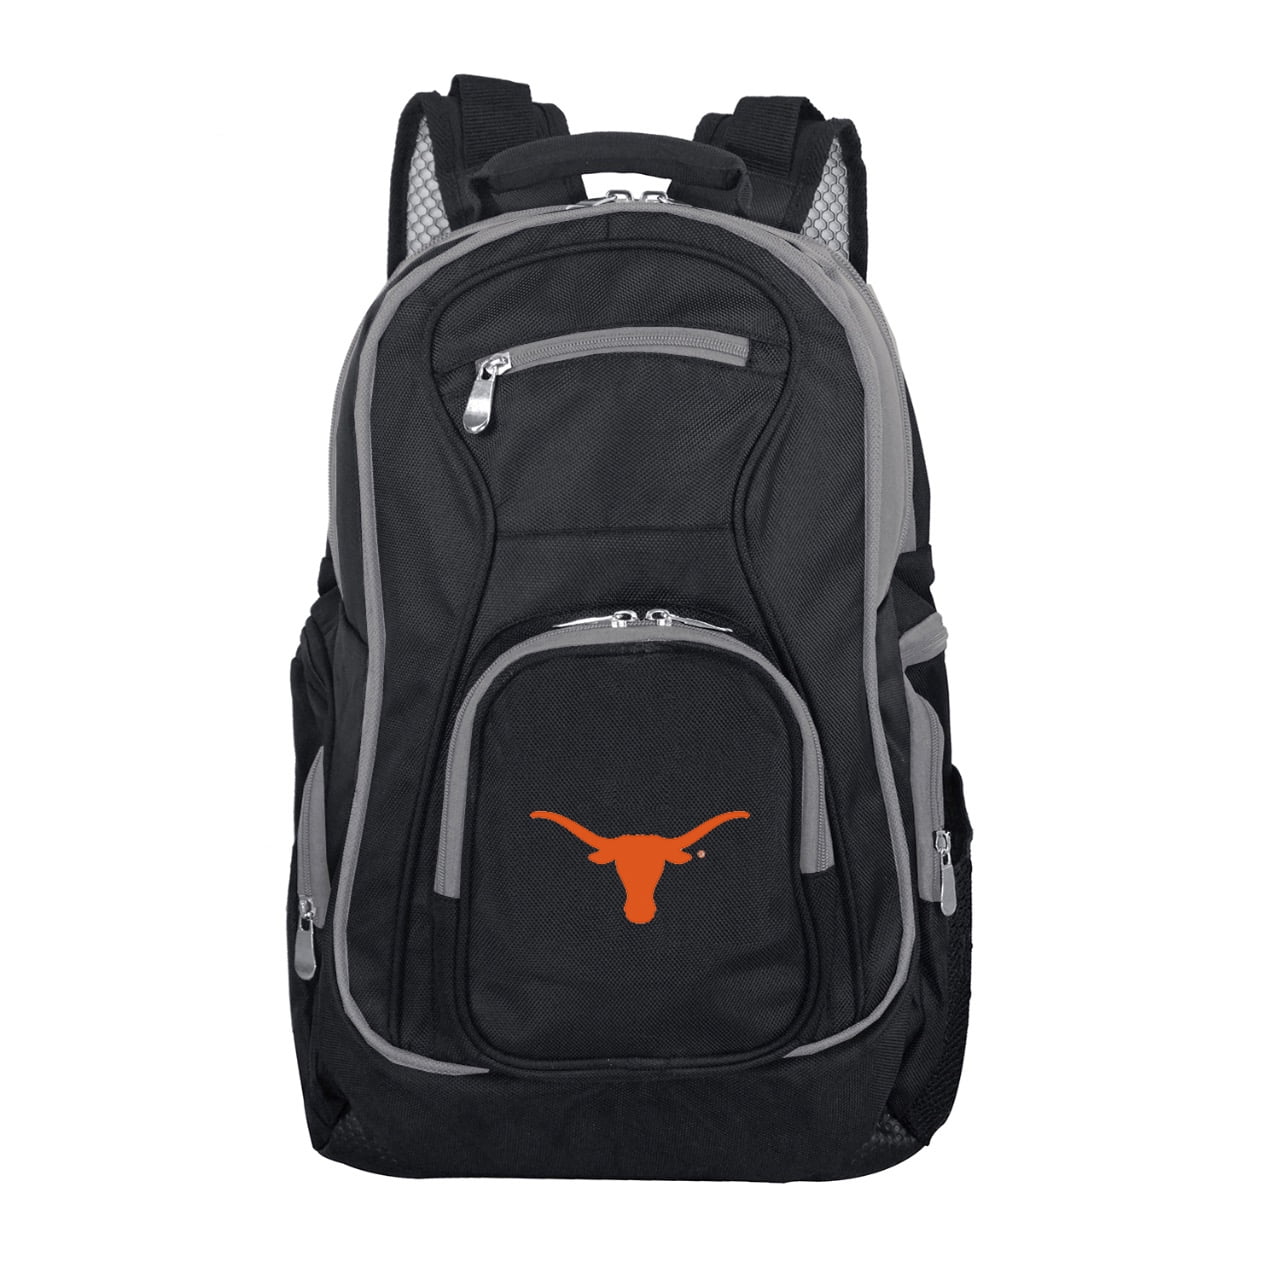 Black 19-inches NCAA Laptop Backpack